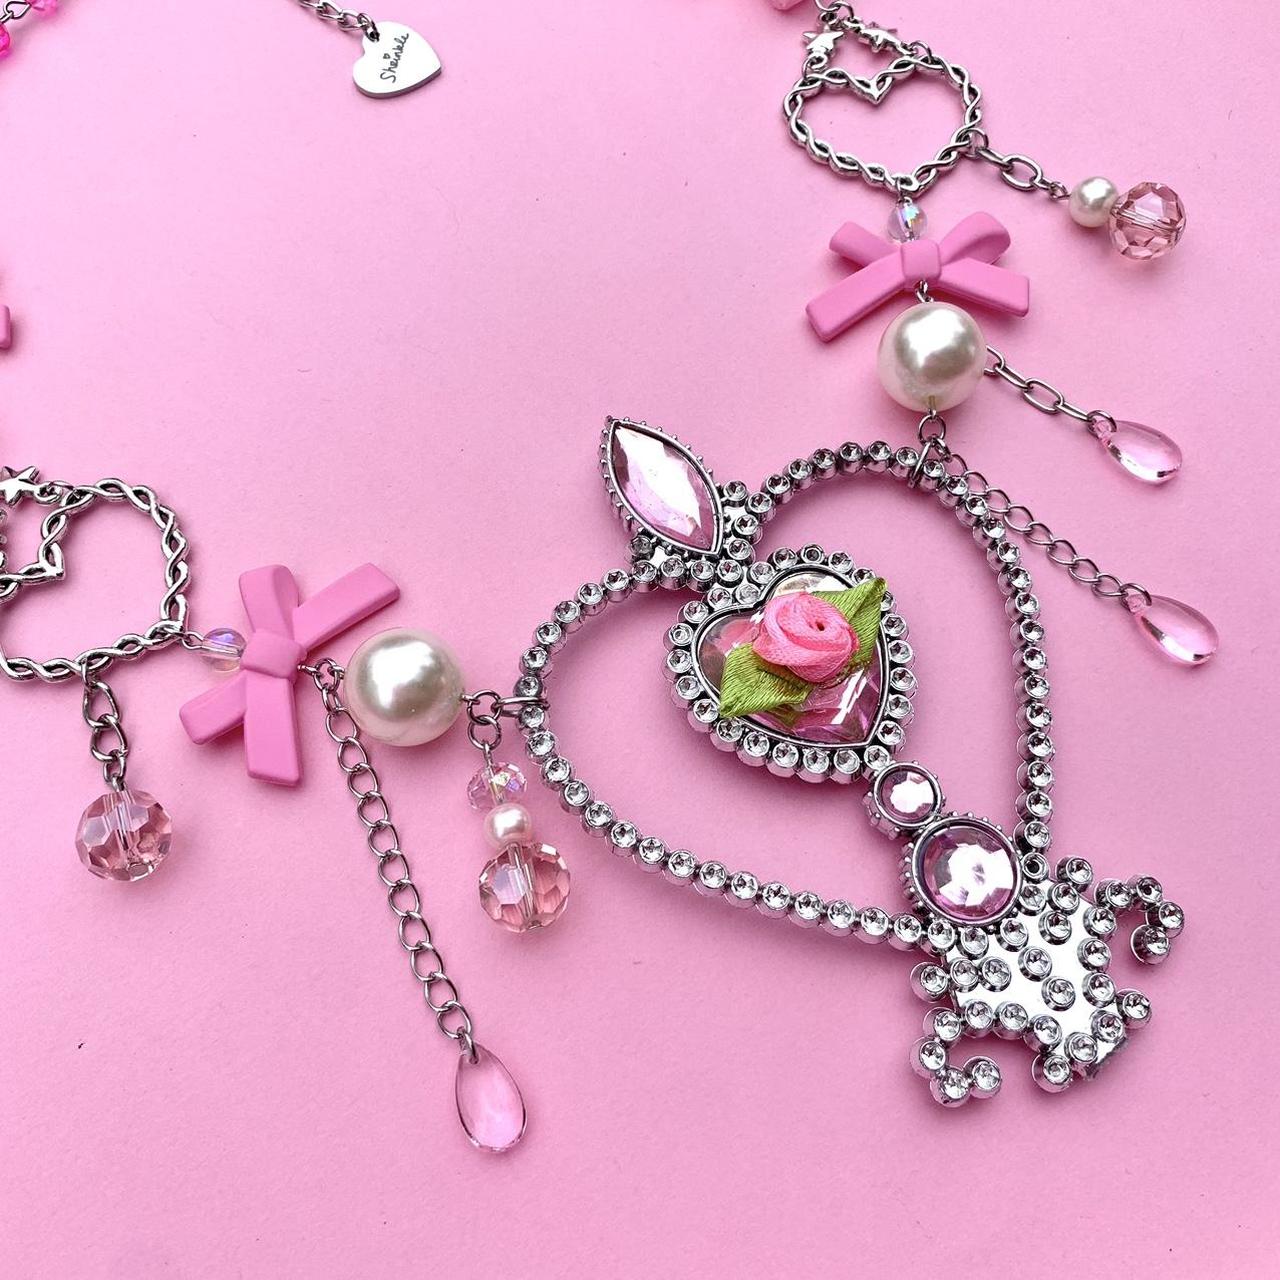 Sugarpill Women's Pink and Silver Jewellery (3)